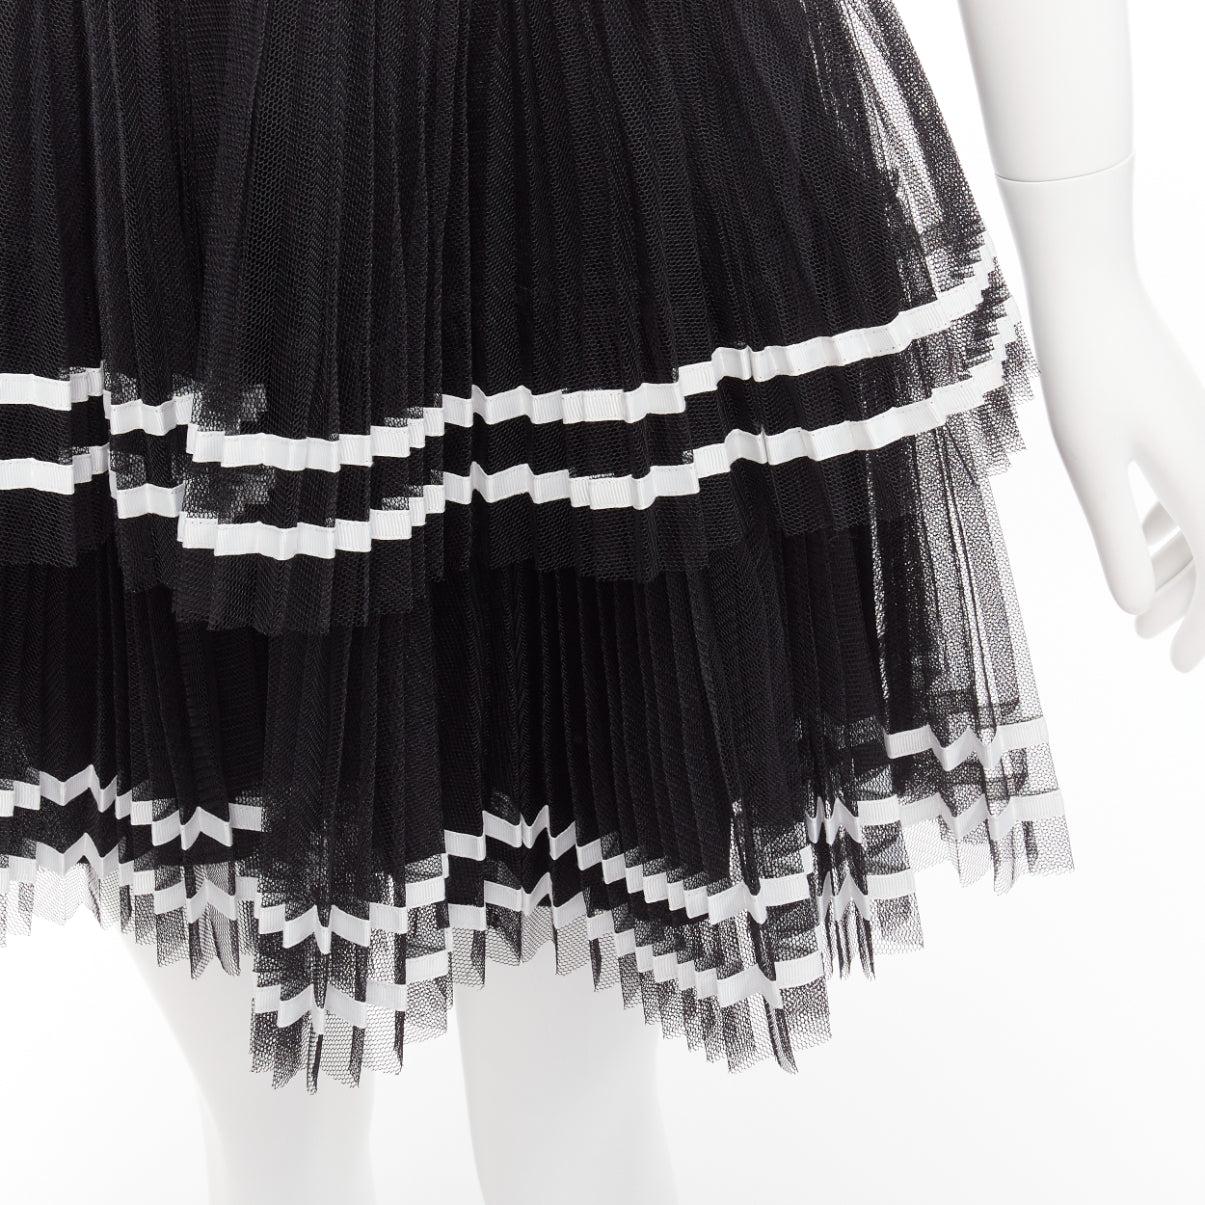 RED VALENTINO 2022 black tiered white stripe tulle pleated mini skirt IT38 XS
Reference: AAWC/A00848
Brand: Red Valentino
Material: Polyamide
Color: Black, White
Pattern: Striped
Closure: Zip
Lining: Black Fabric
Extra Details: Back zip. Lined.
Made